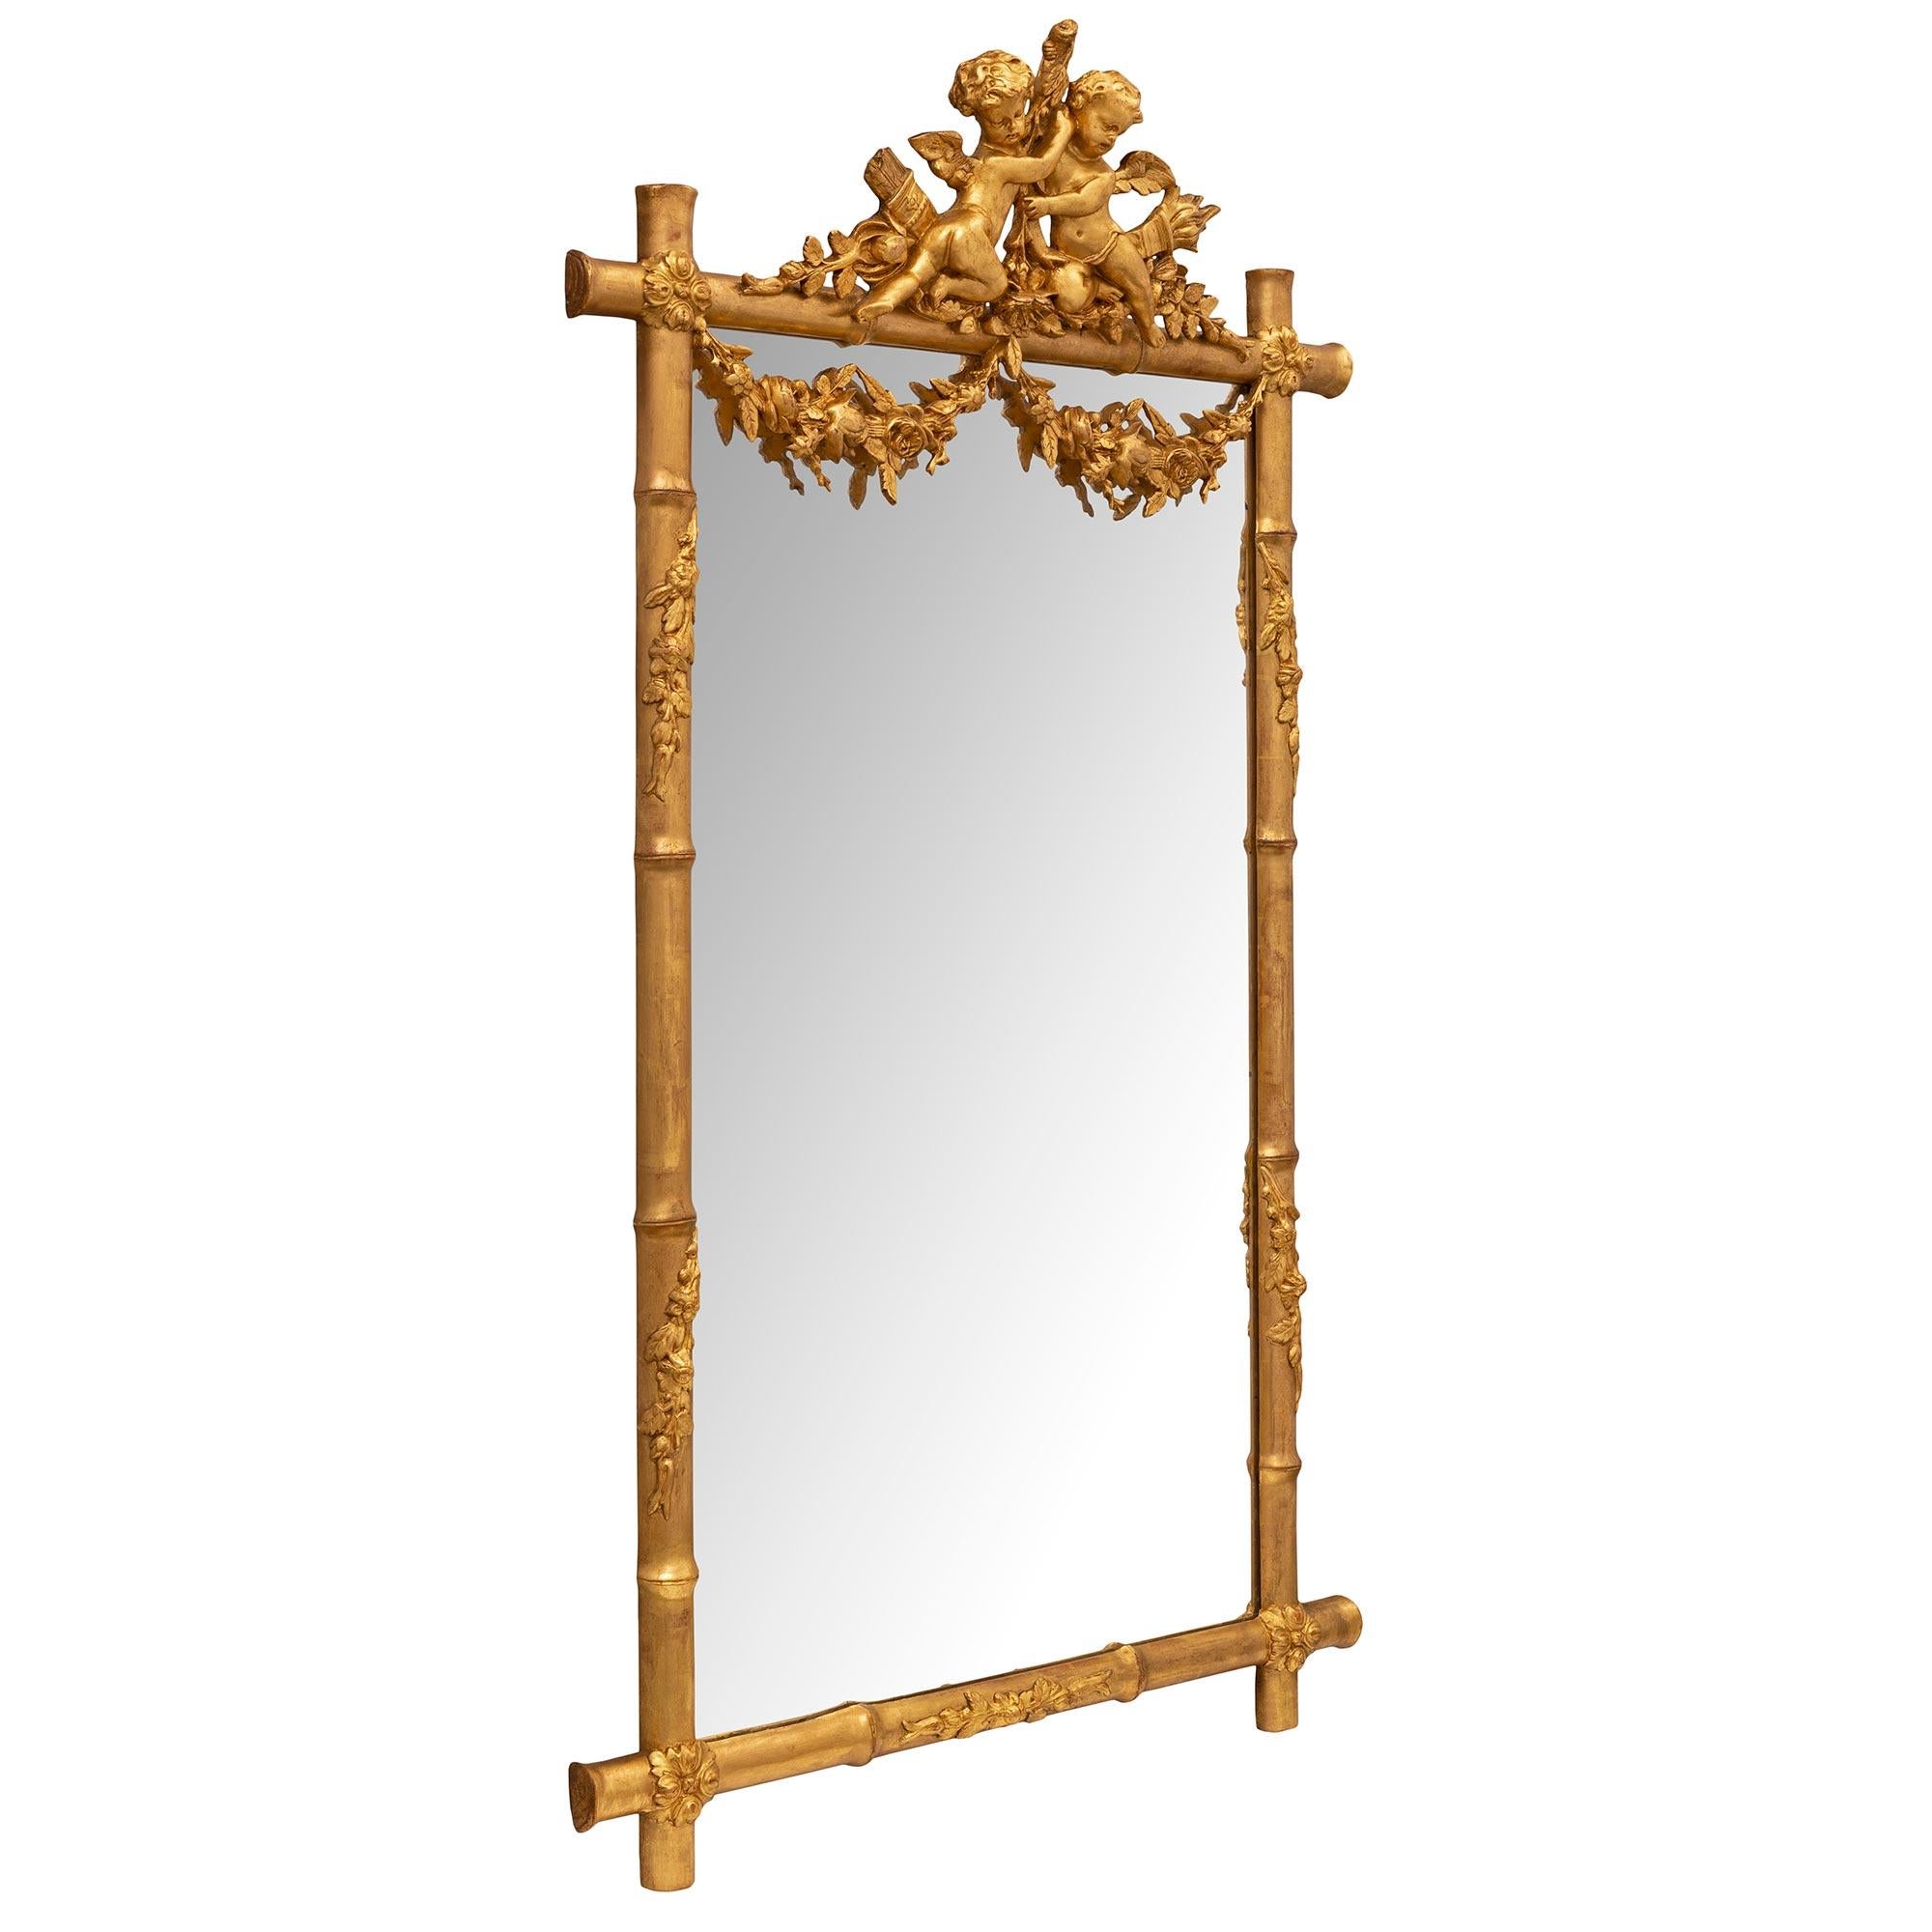 A most decorative French 19th century Louis XVI st. giltwood mirror. The mirror is set within a beautiful bamboo designed frame tied by charming rosettes and adorned with wrap around vine like branches. The top crown is centered by two cherubs